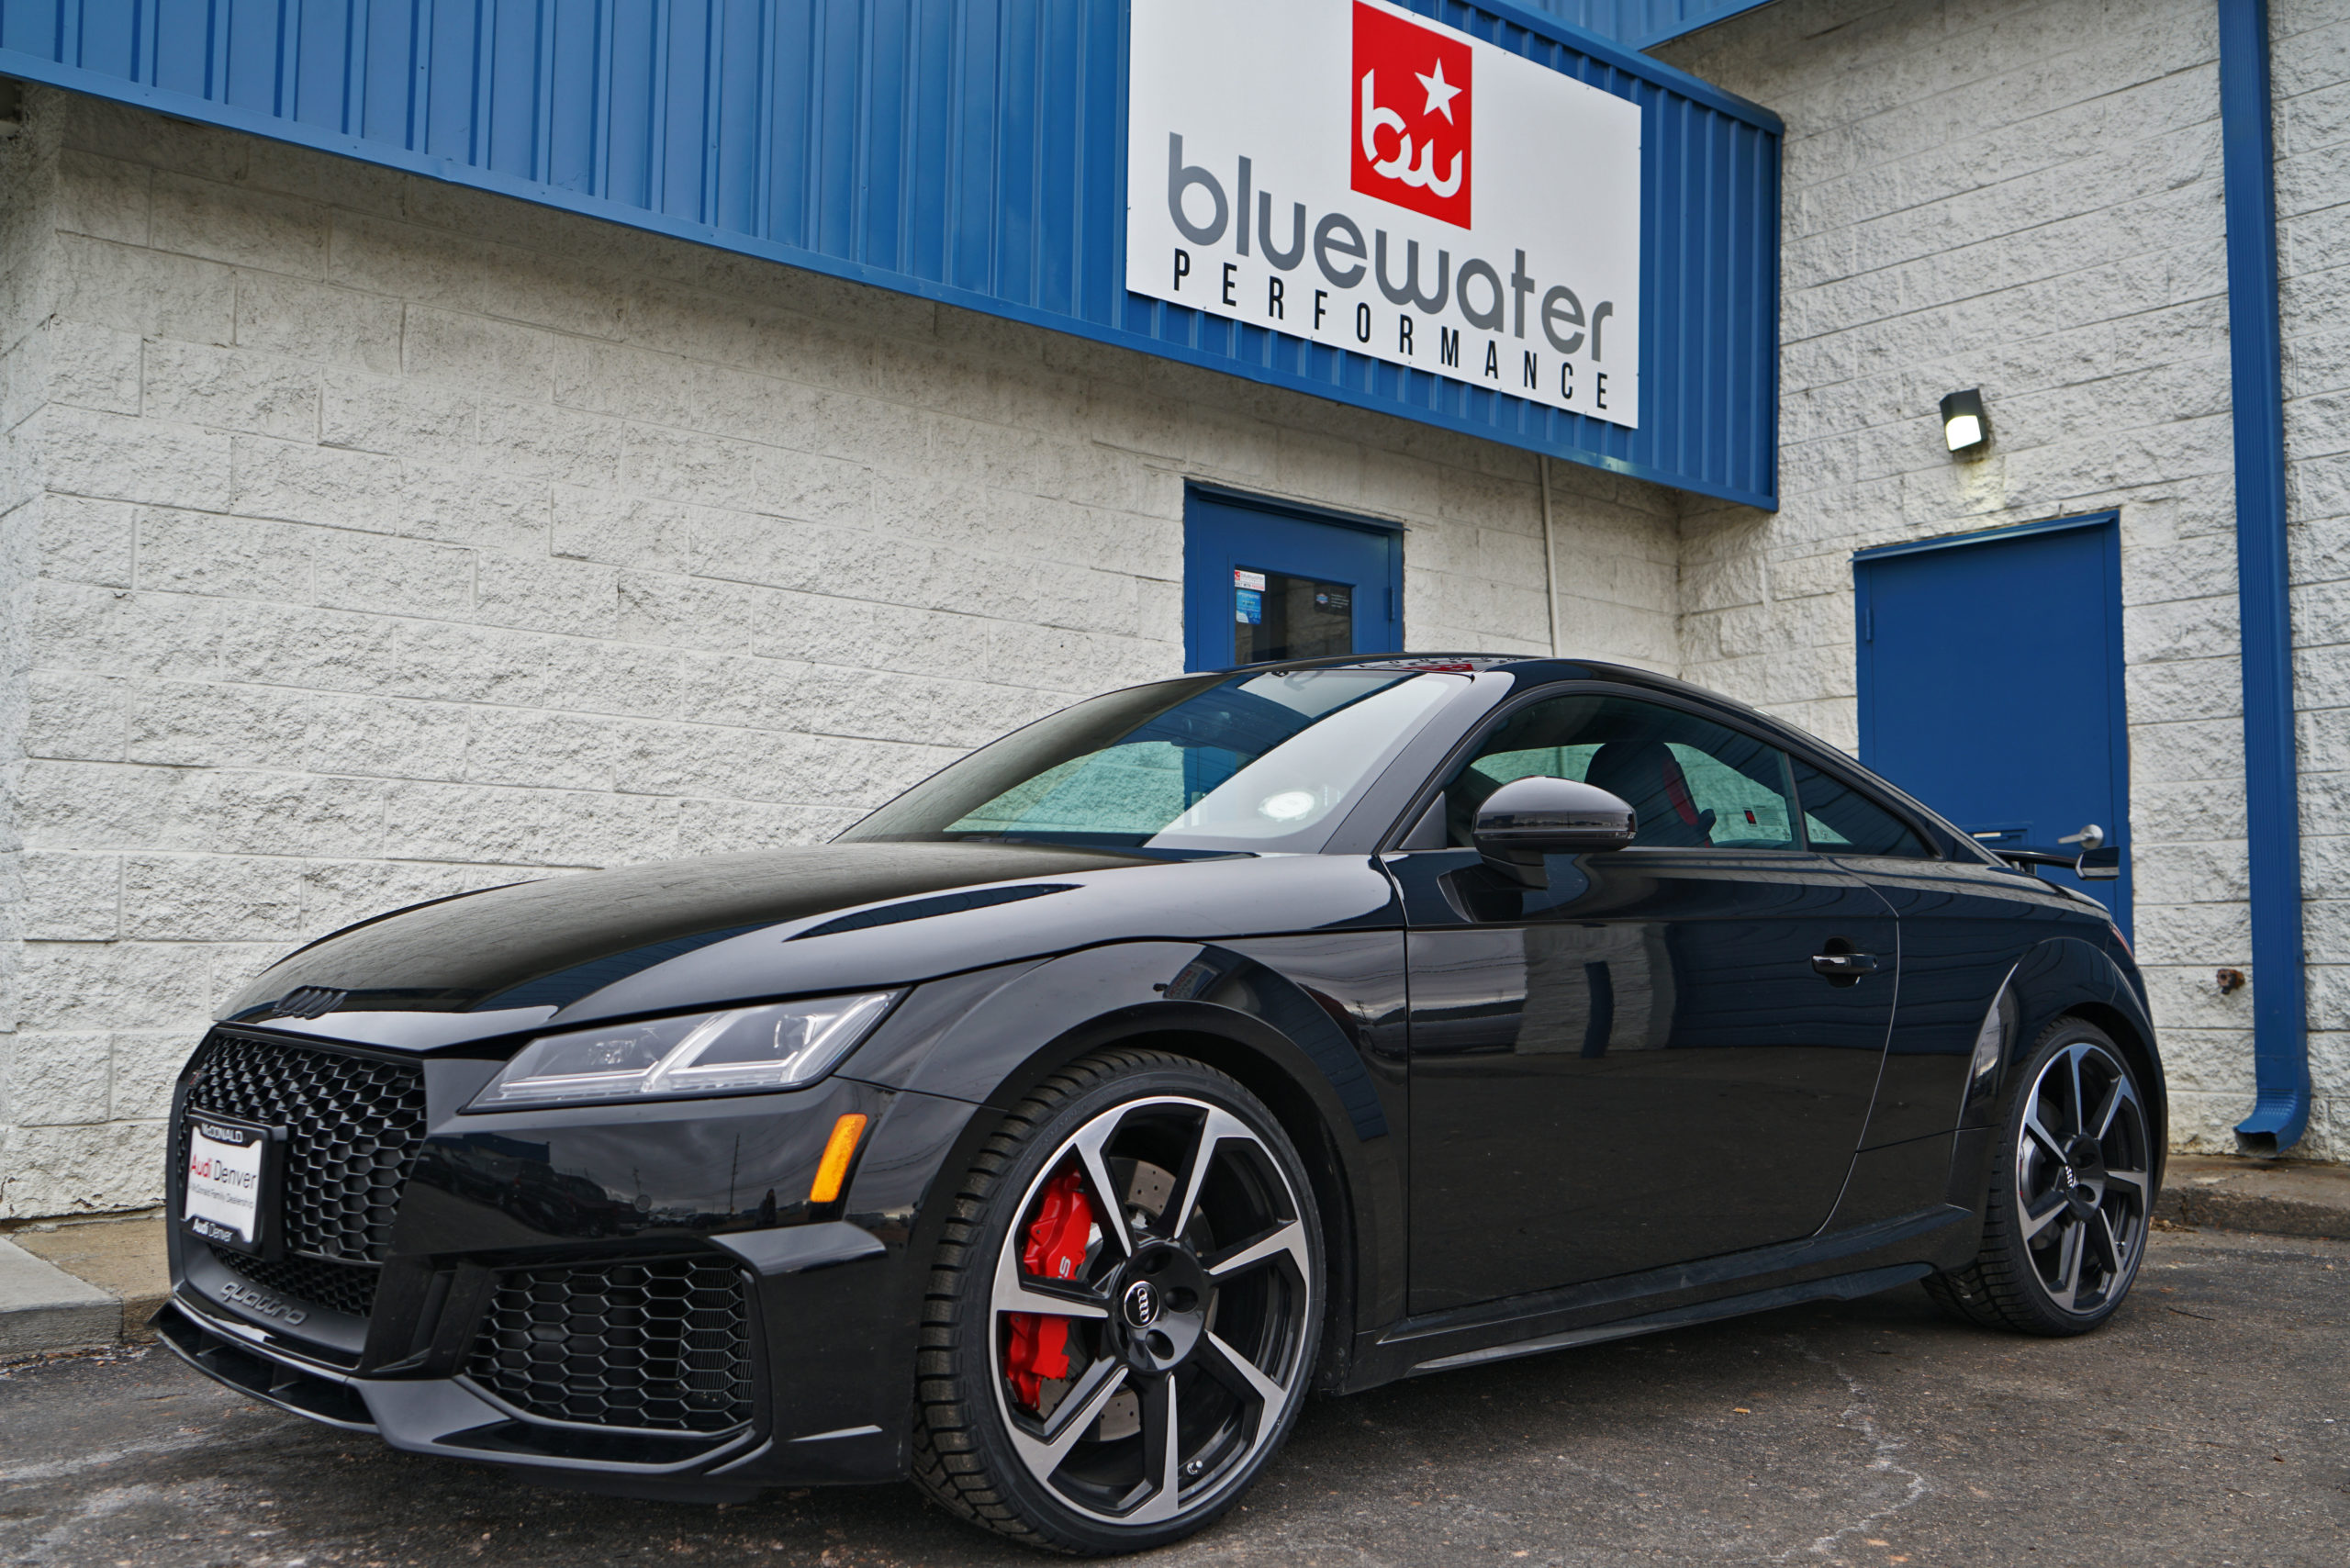 The picture shows a black Audi outside Bluewater Performance undergoing an Audi tire replacement.